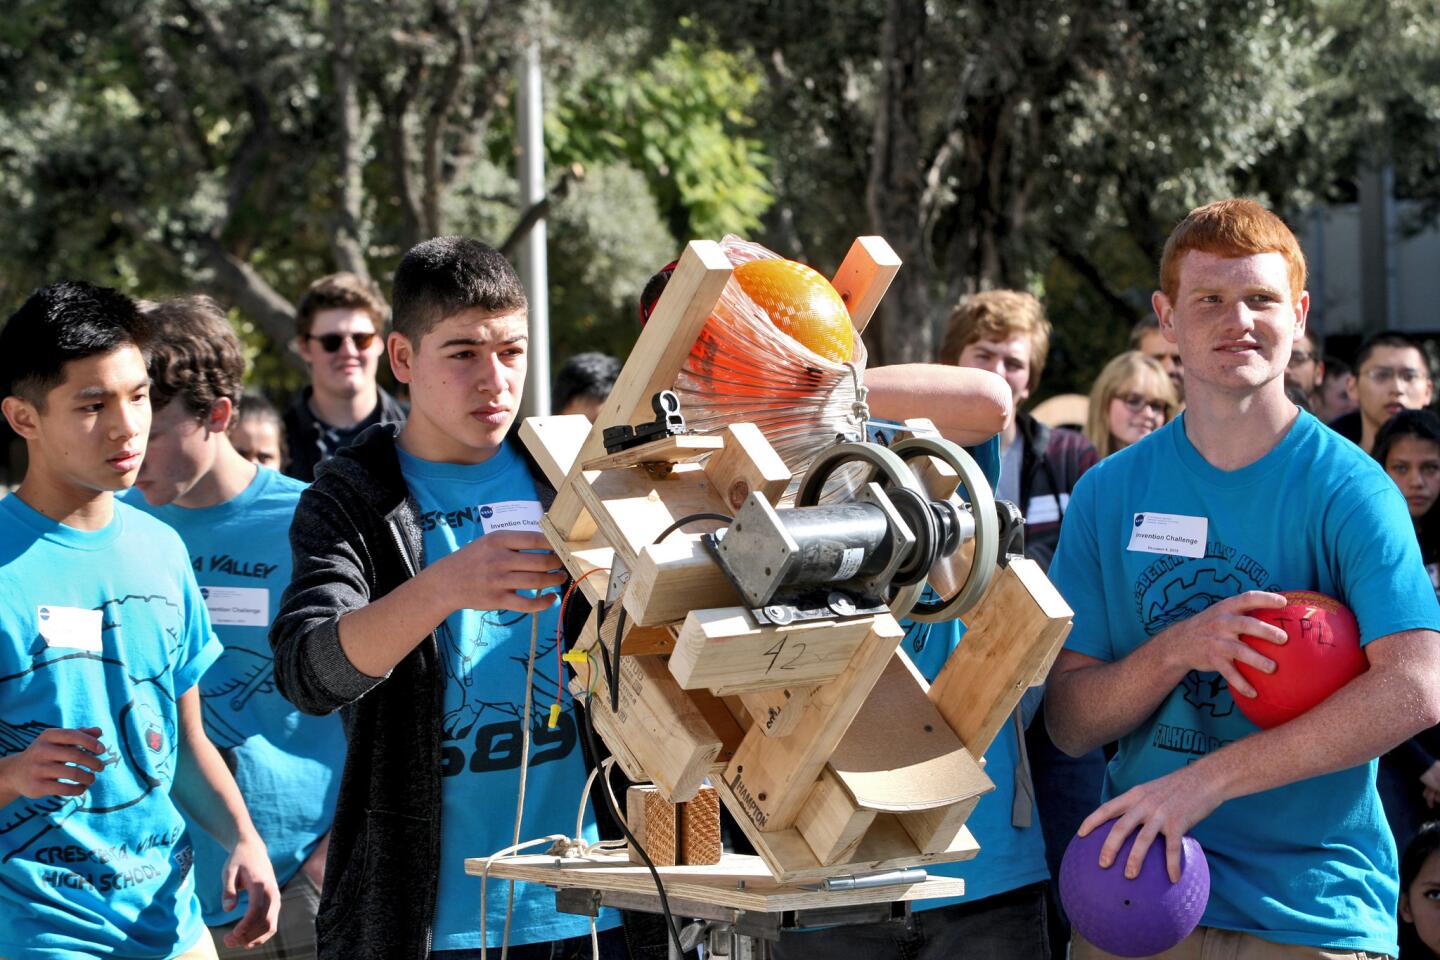 Members of the Crescenta Valley High School team (front, left to right: Lyron Co Ting Keh, Krikor Atachian and Joshua Kauffman) prepare to launch the ball at a target during the Jet Propulsion Laboratory Invention Challenge 2015 at JPL in La Cañada Flintridge on Friday, December 4, 2015. The team came in 4th place from more than 20 teams.